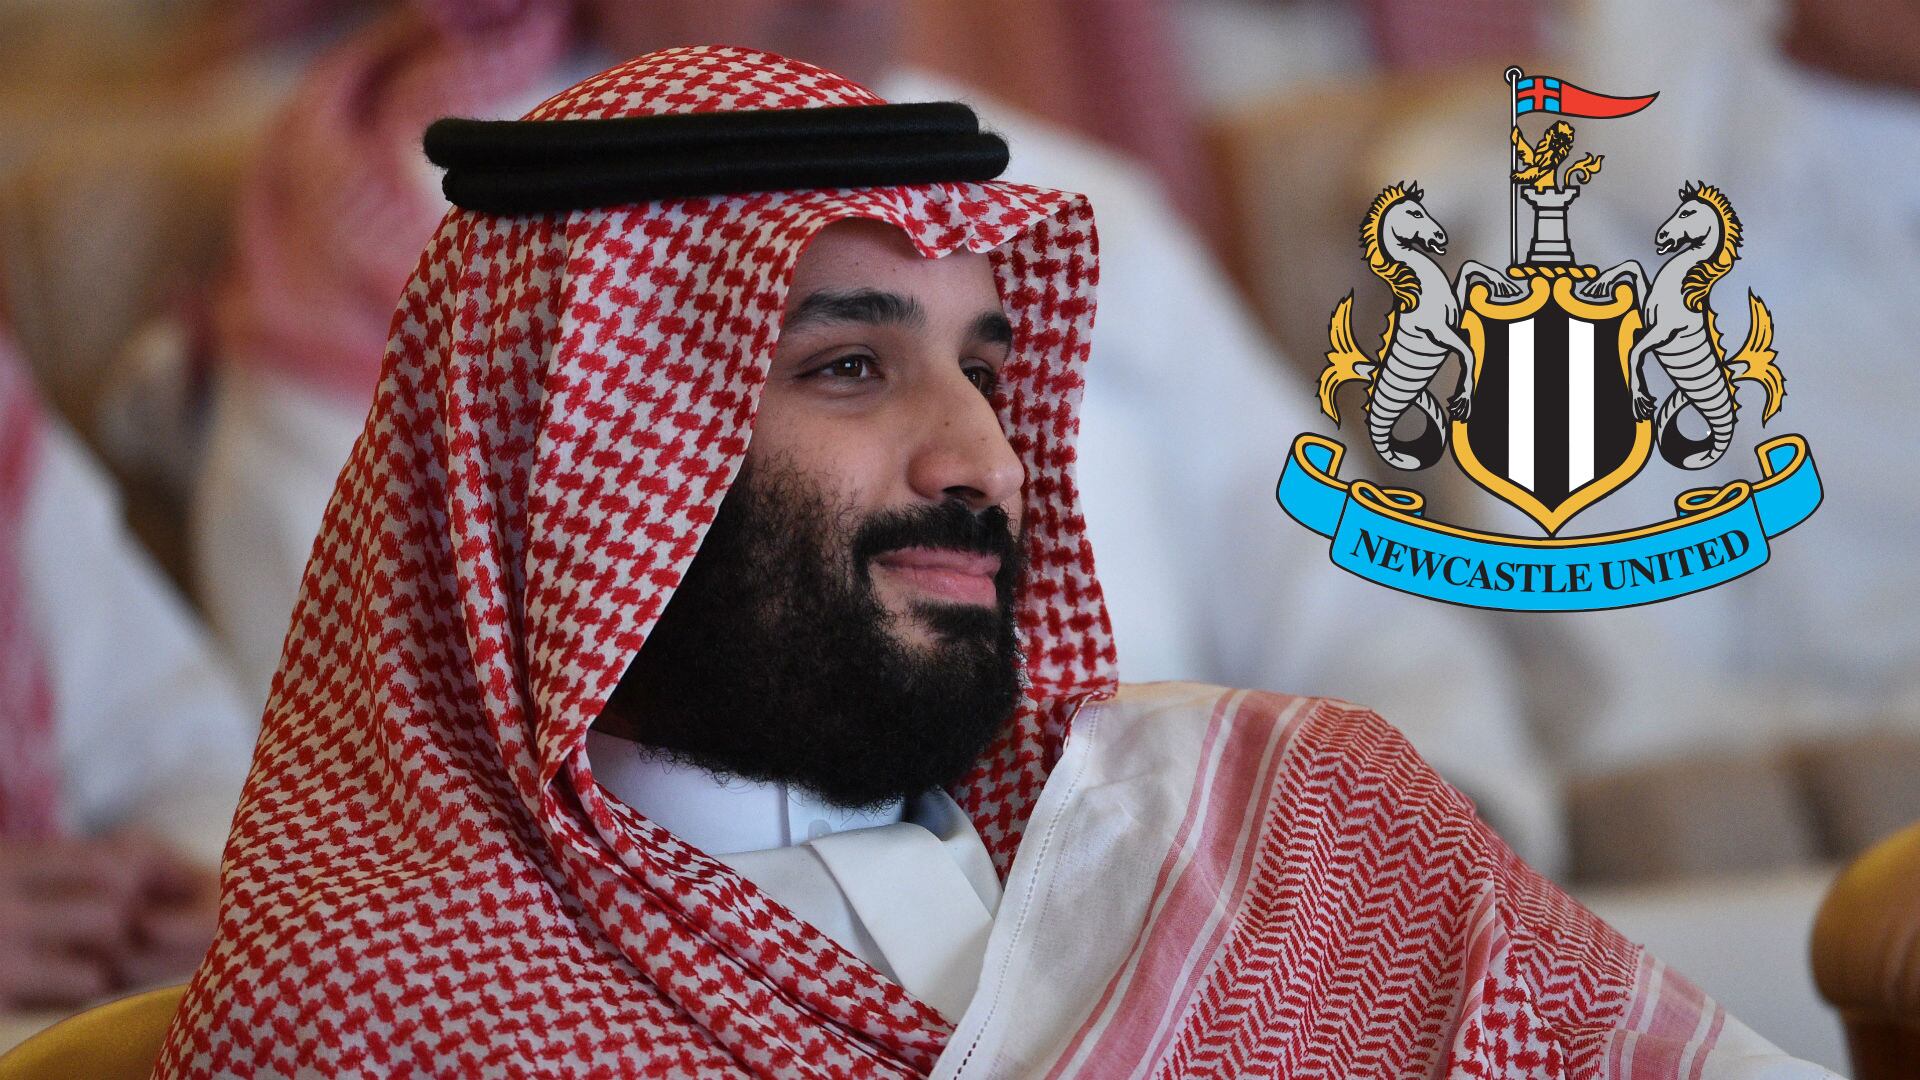 Expand their business? The Saudi prince of Newcastle has a South American team in his sights